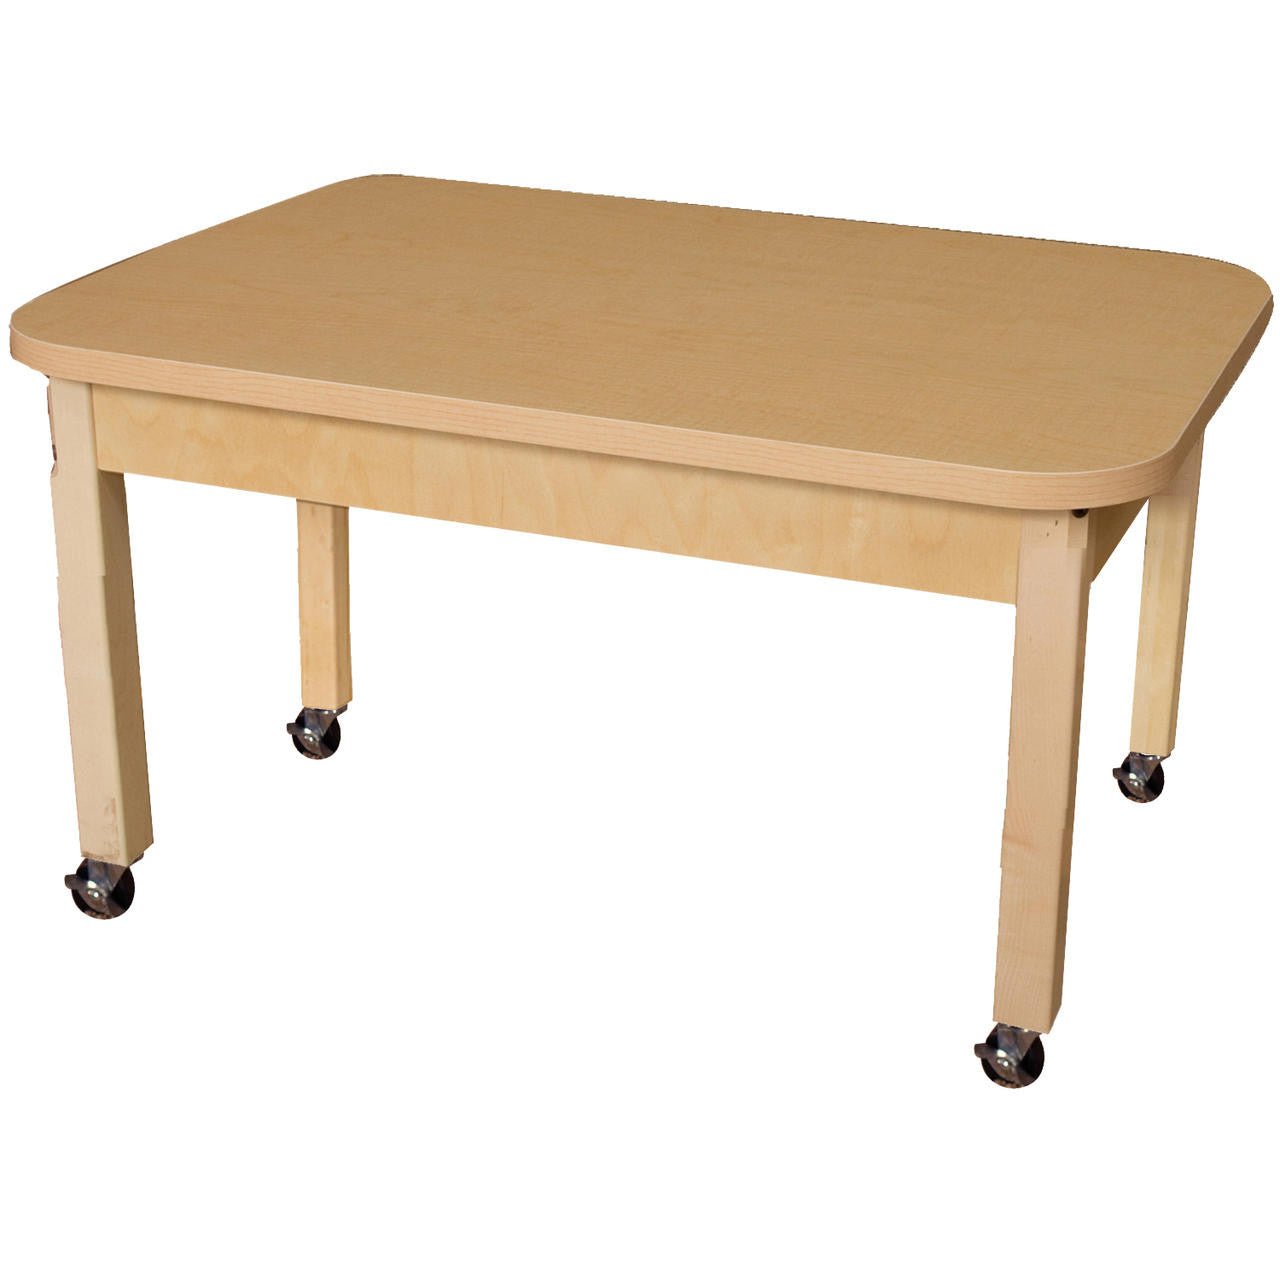 Rectangle High Pressure Laminate Table with Hardwood Legs- 16